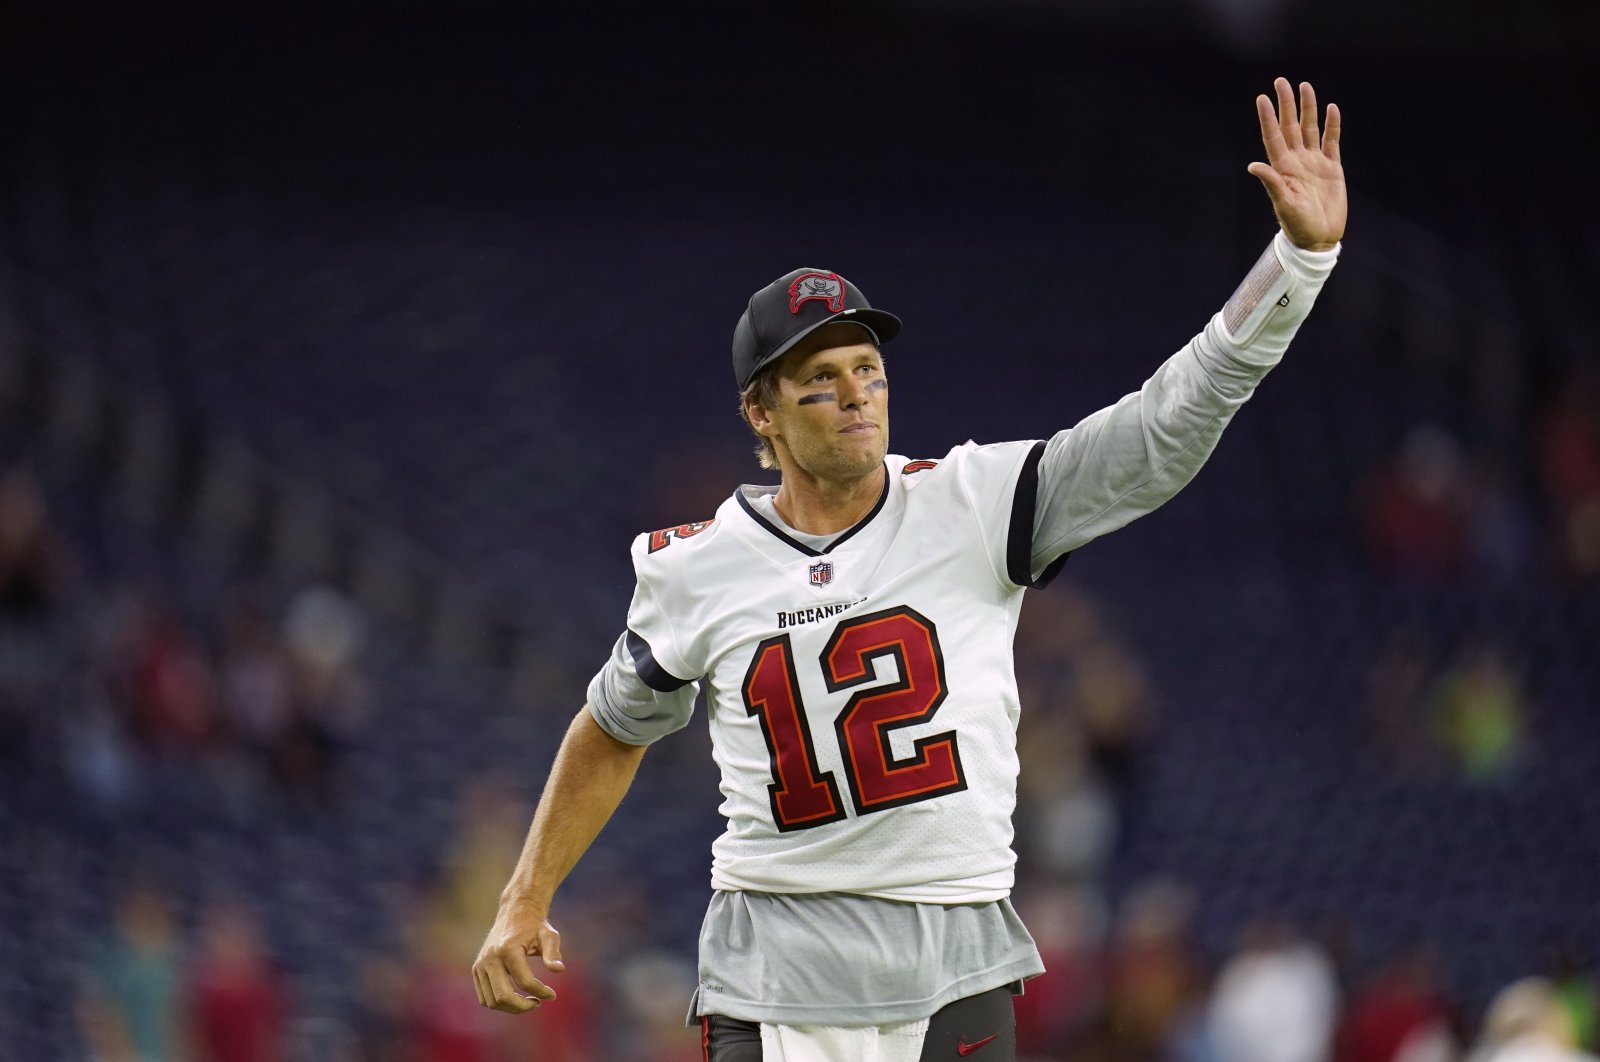 Tampa Bay Buccaneers quarterback Tom Brady waves toward the fans as he leaves the field after an NFL game against the Houston Texans, Houston, Texas, U.S., Aug. 28, 2021. (AP Photo)